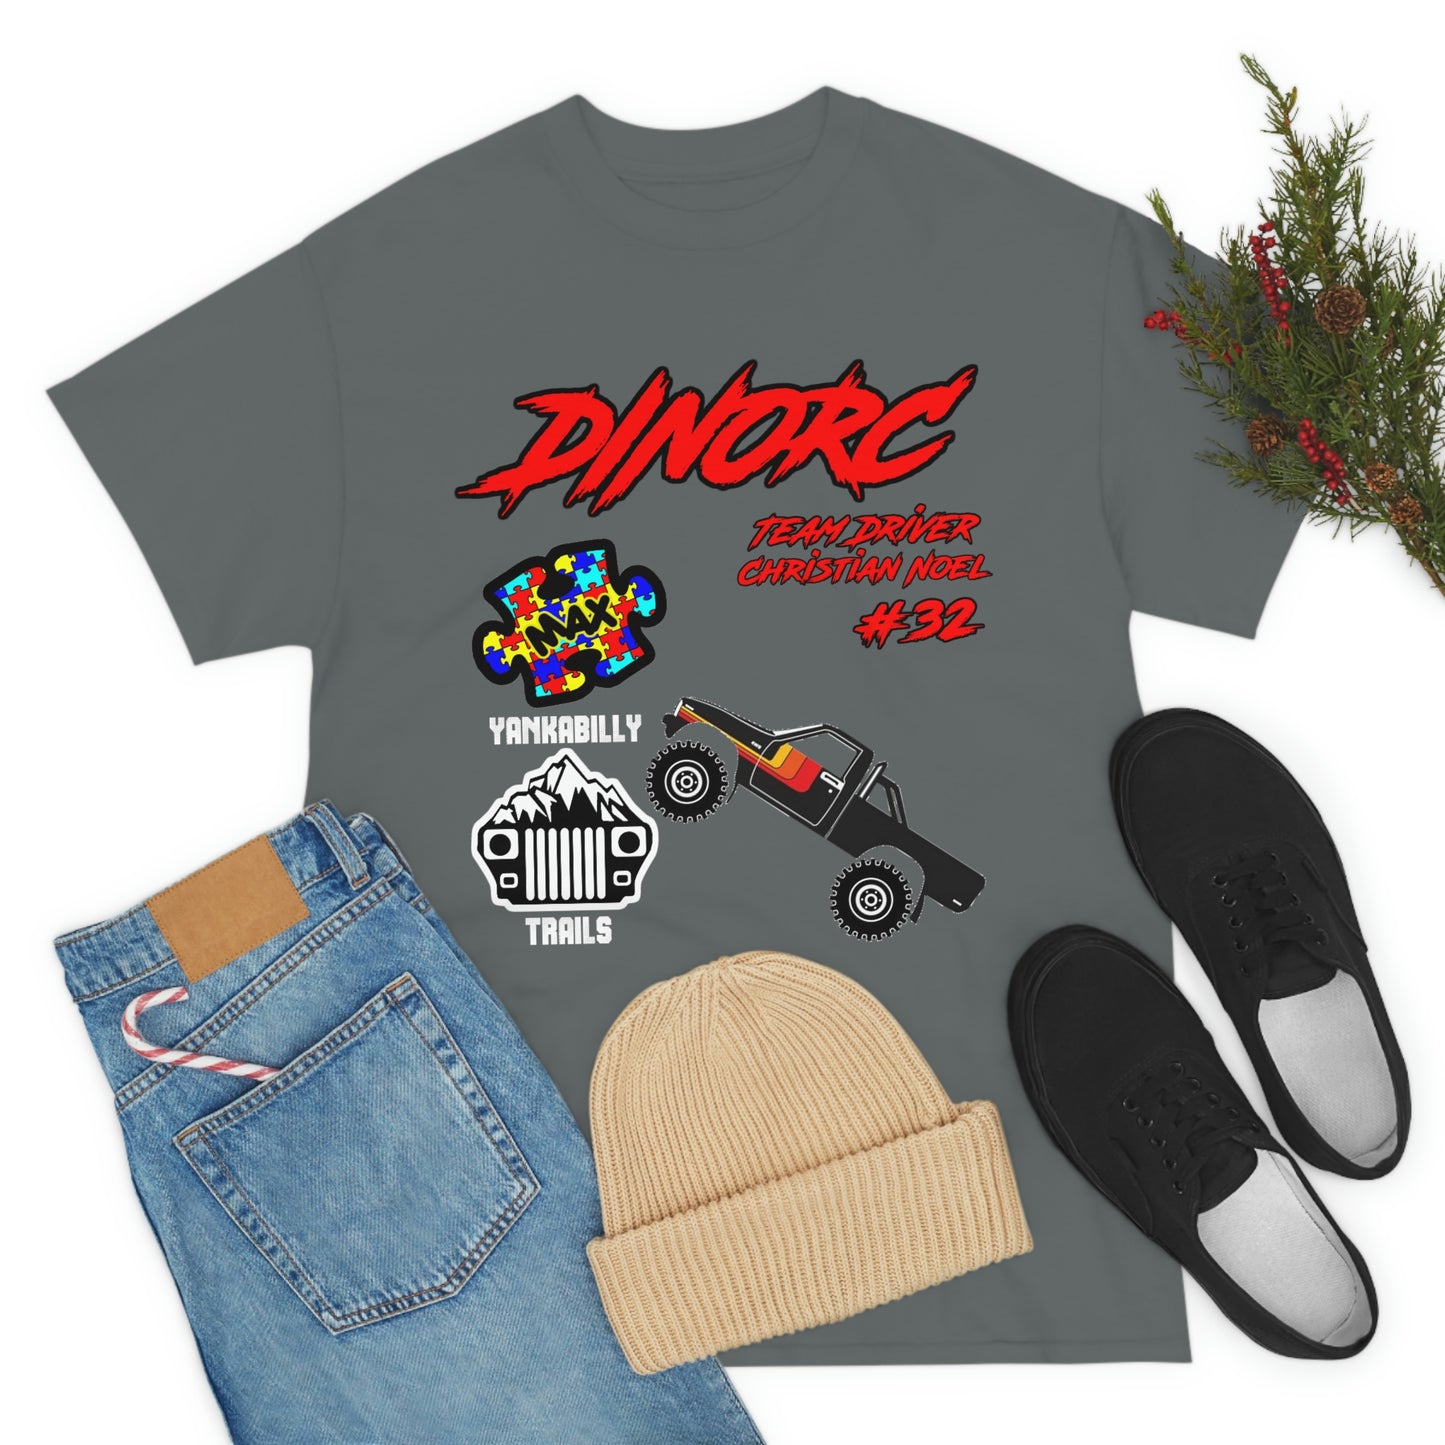 Team Driver Christian Noel truck logo Front and Back DinoRc Logo T-Shirt S-5x 5 colors